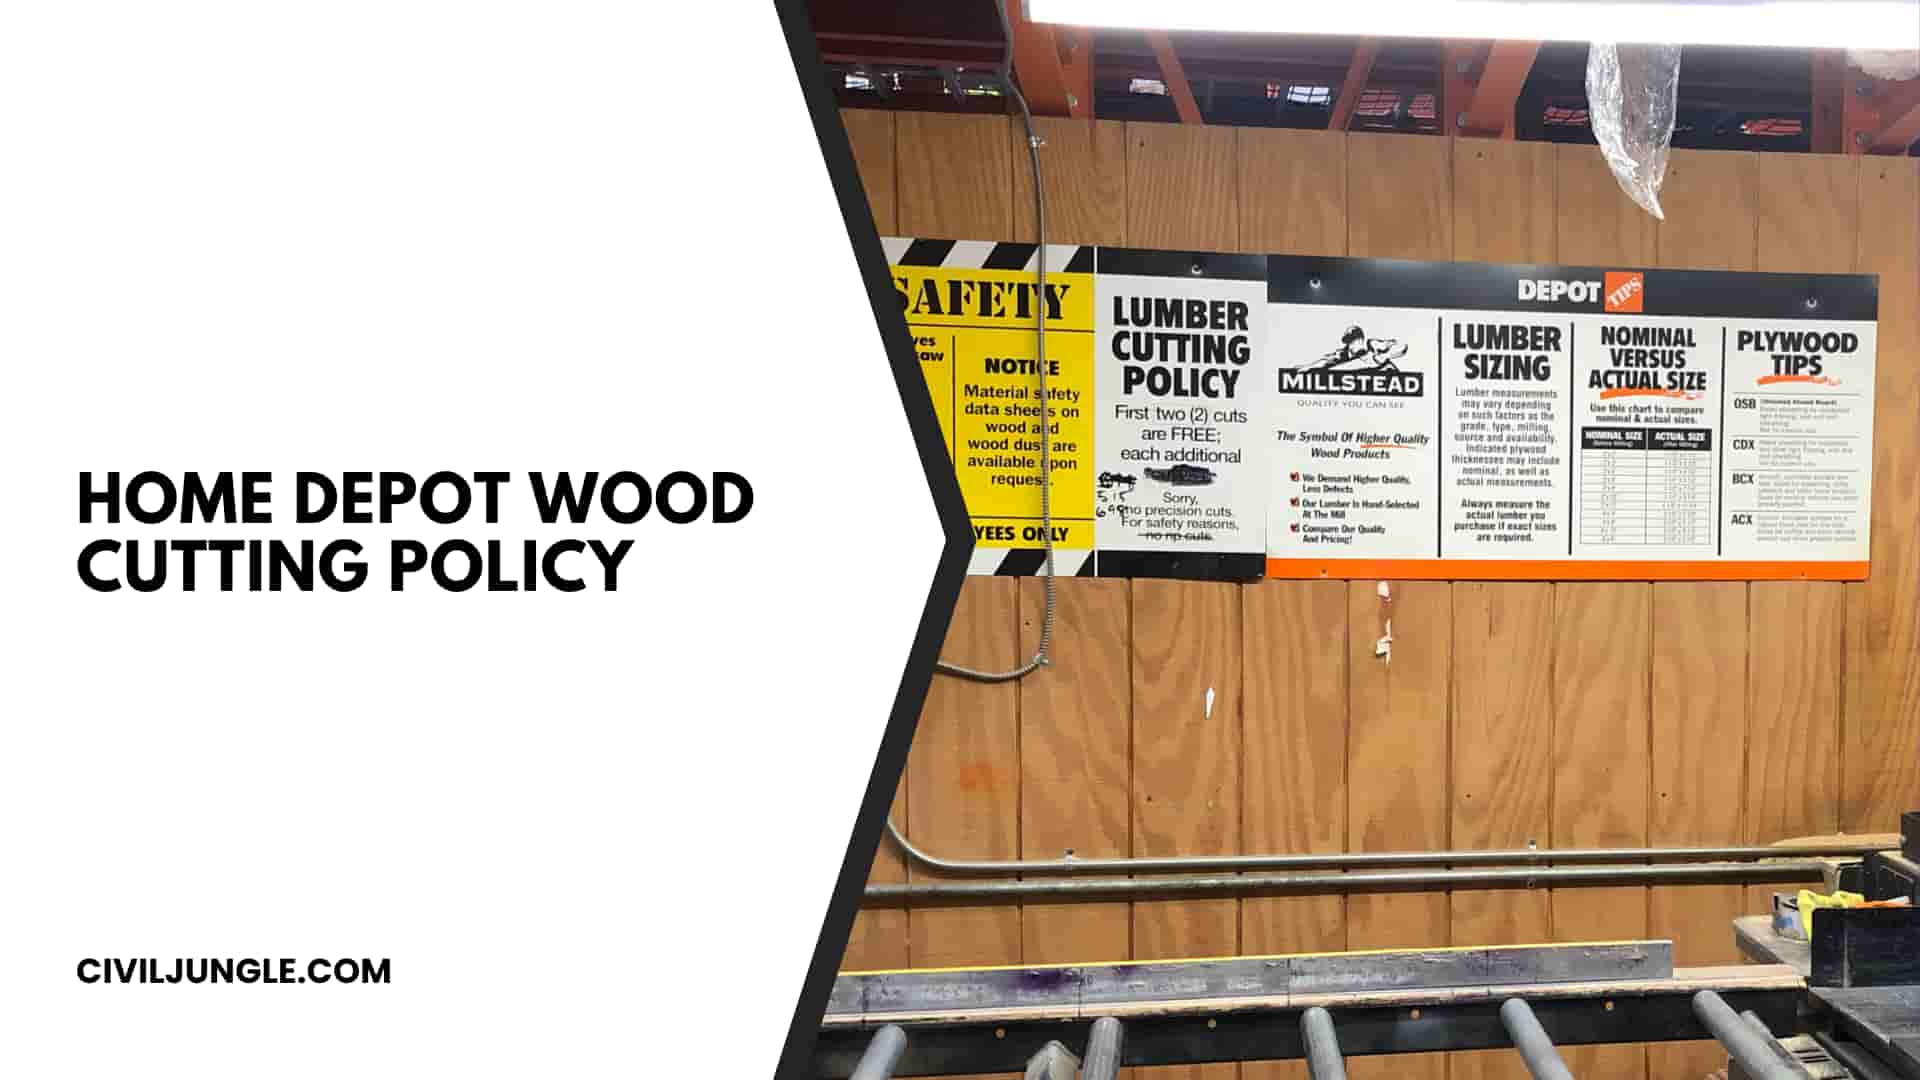 Home Depot Wood Cutting Policy